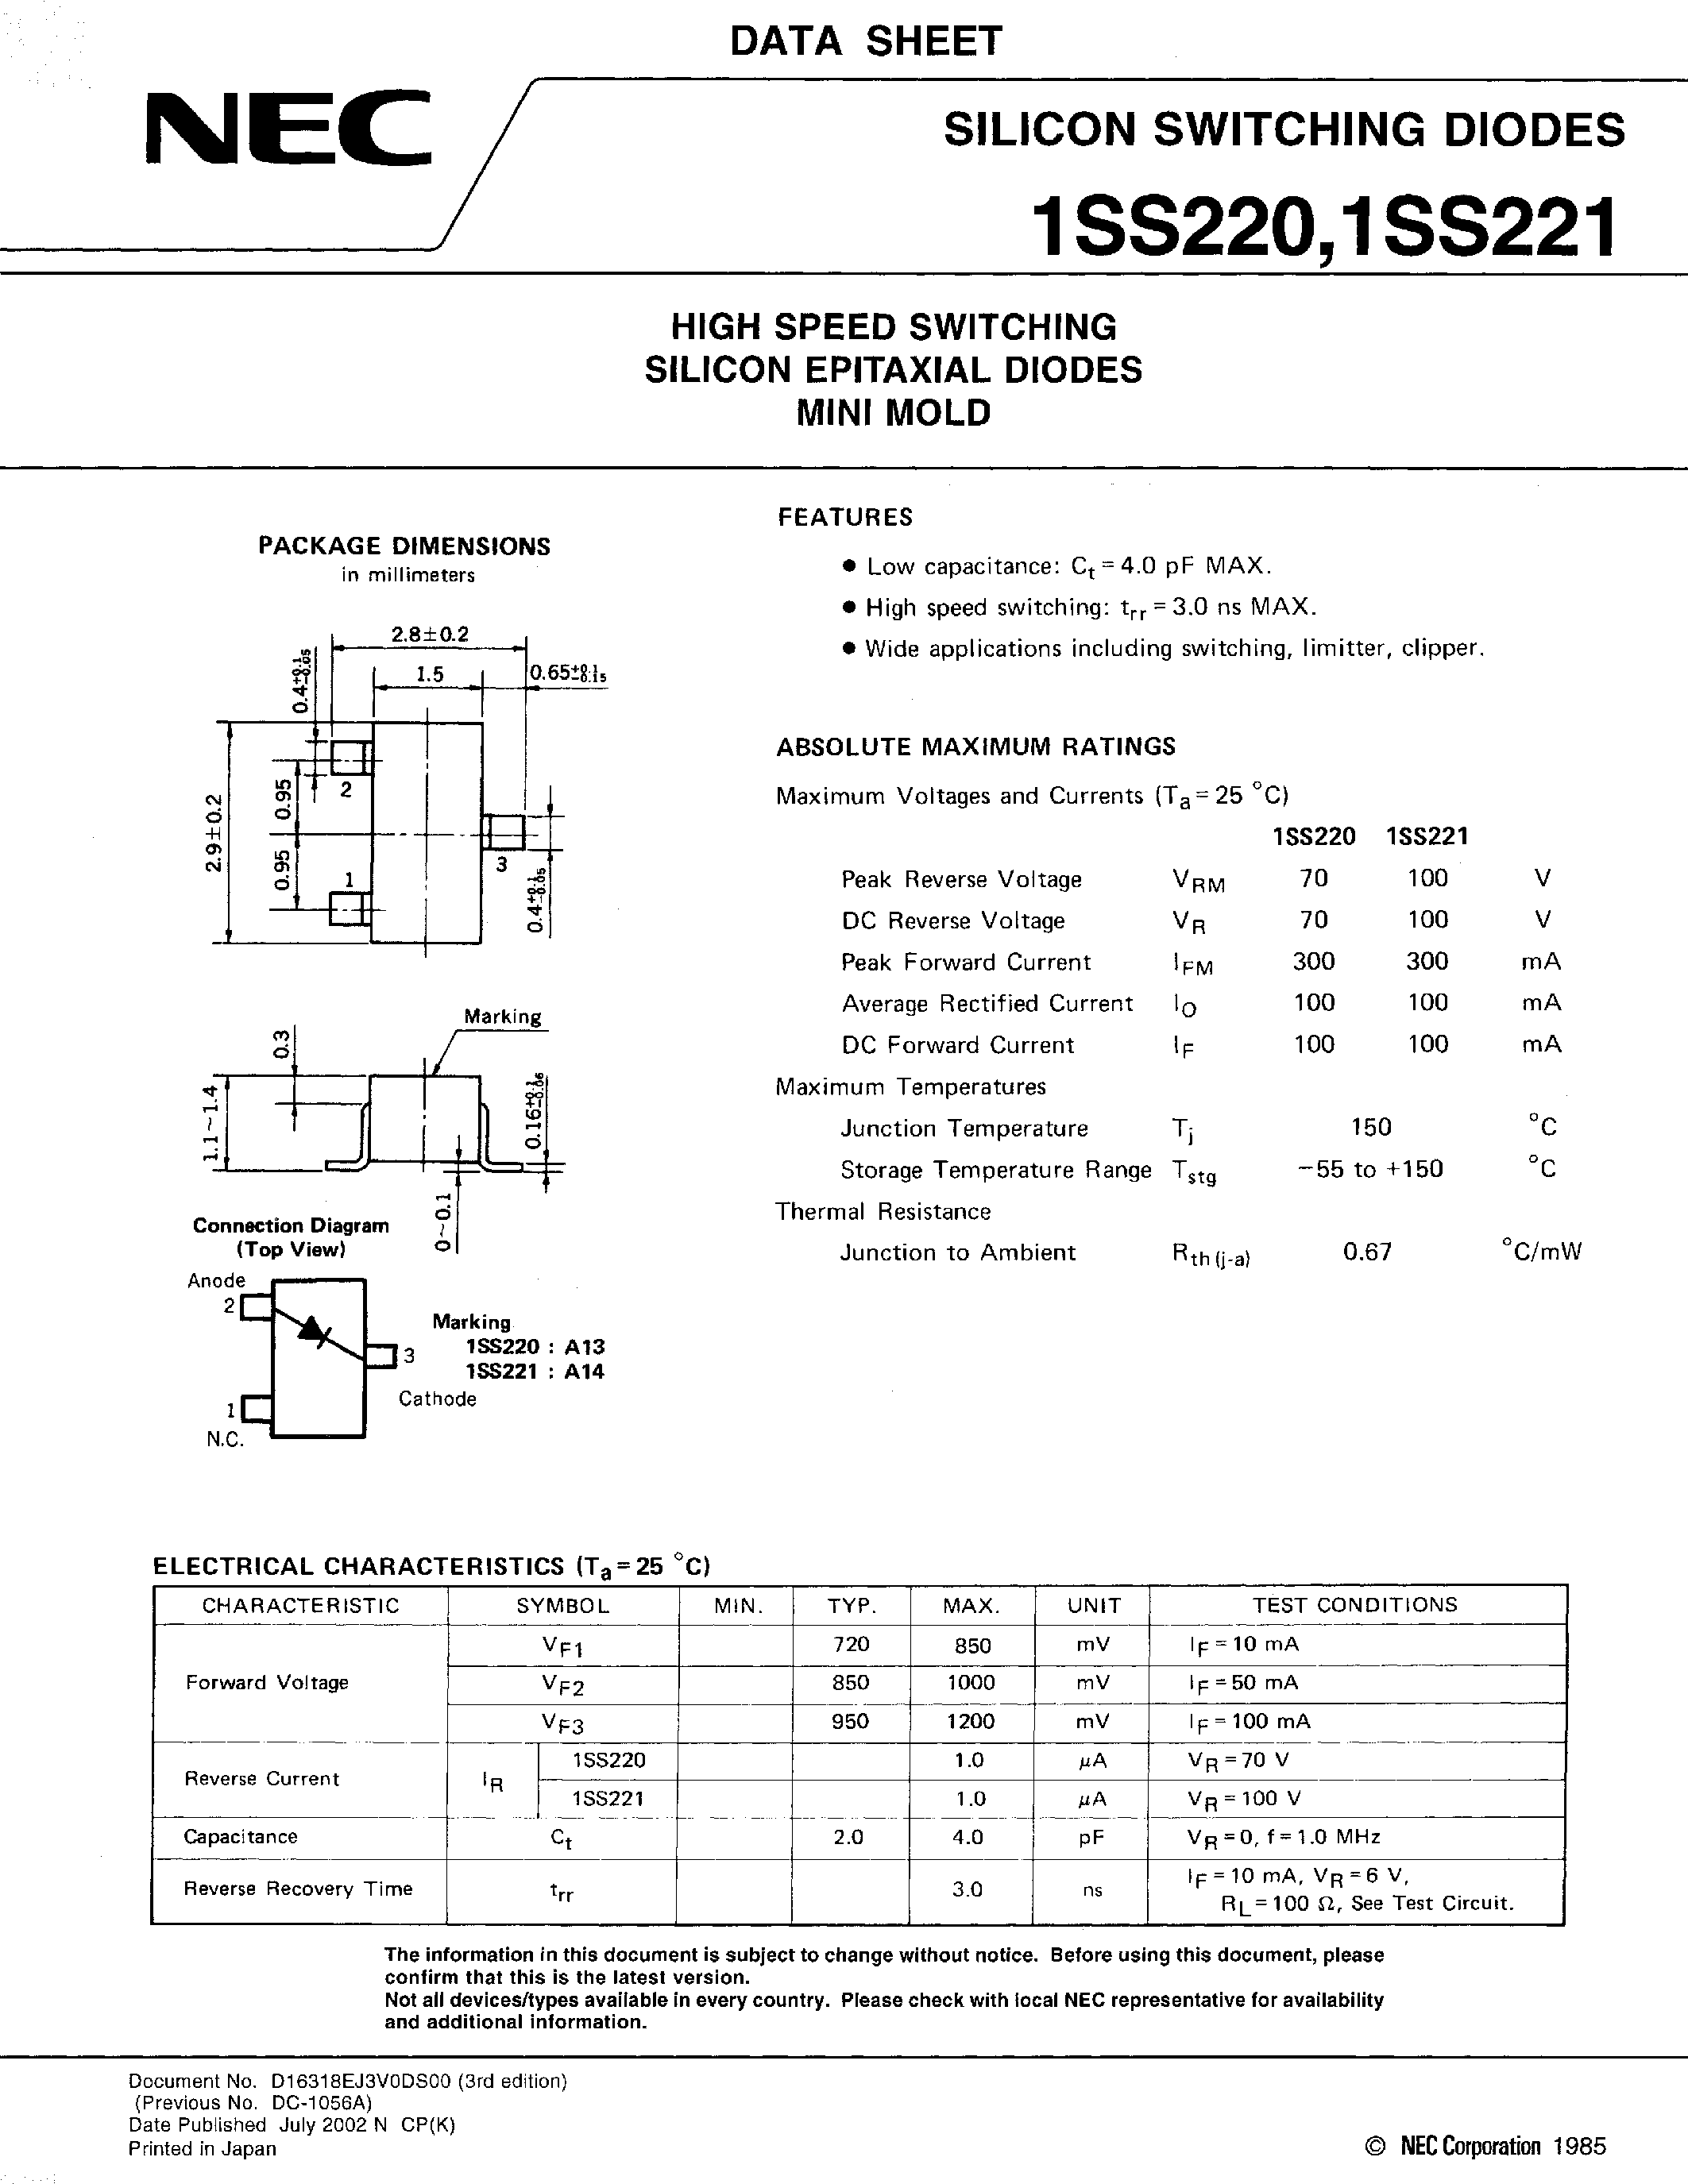 Datasheet 1SS220 - (1SS220 / 1SS221) SILICON SWITCHING DIODES page 1